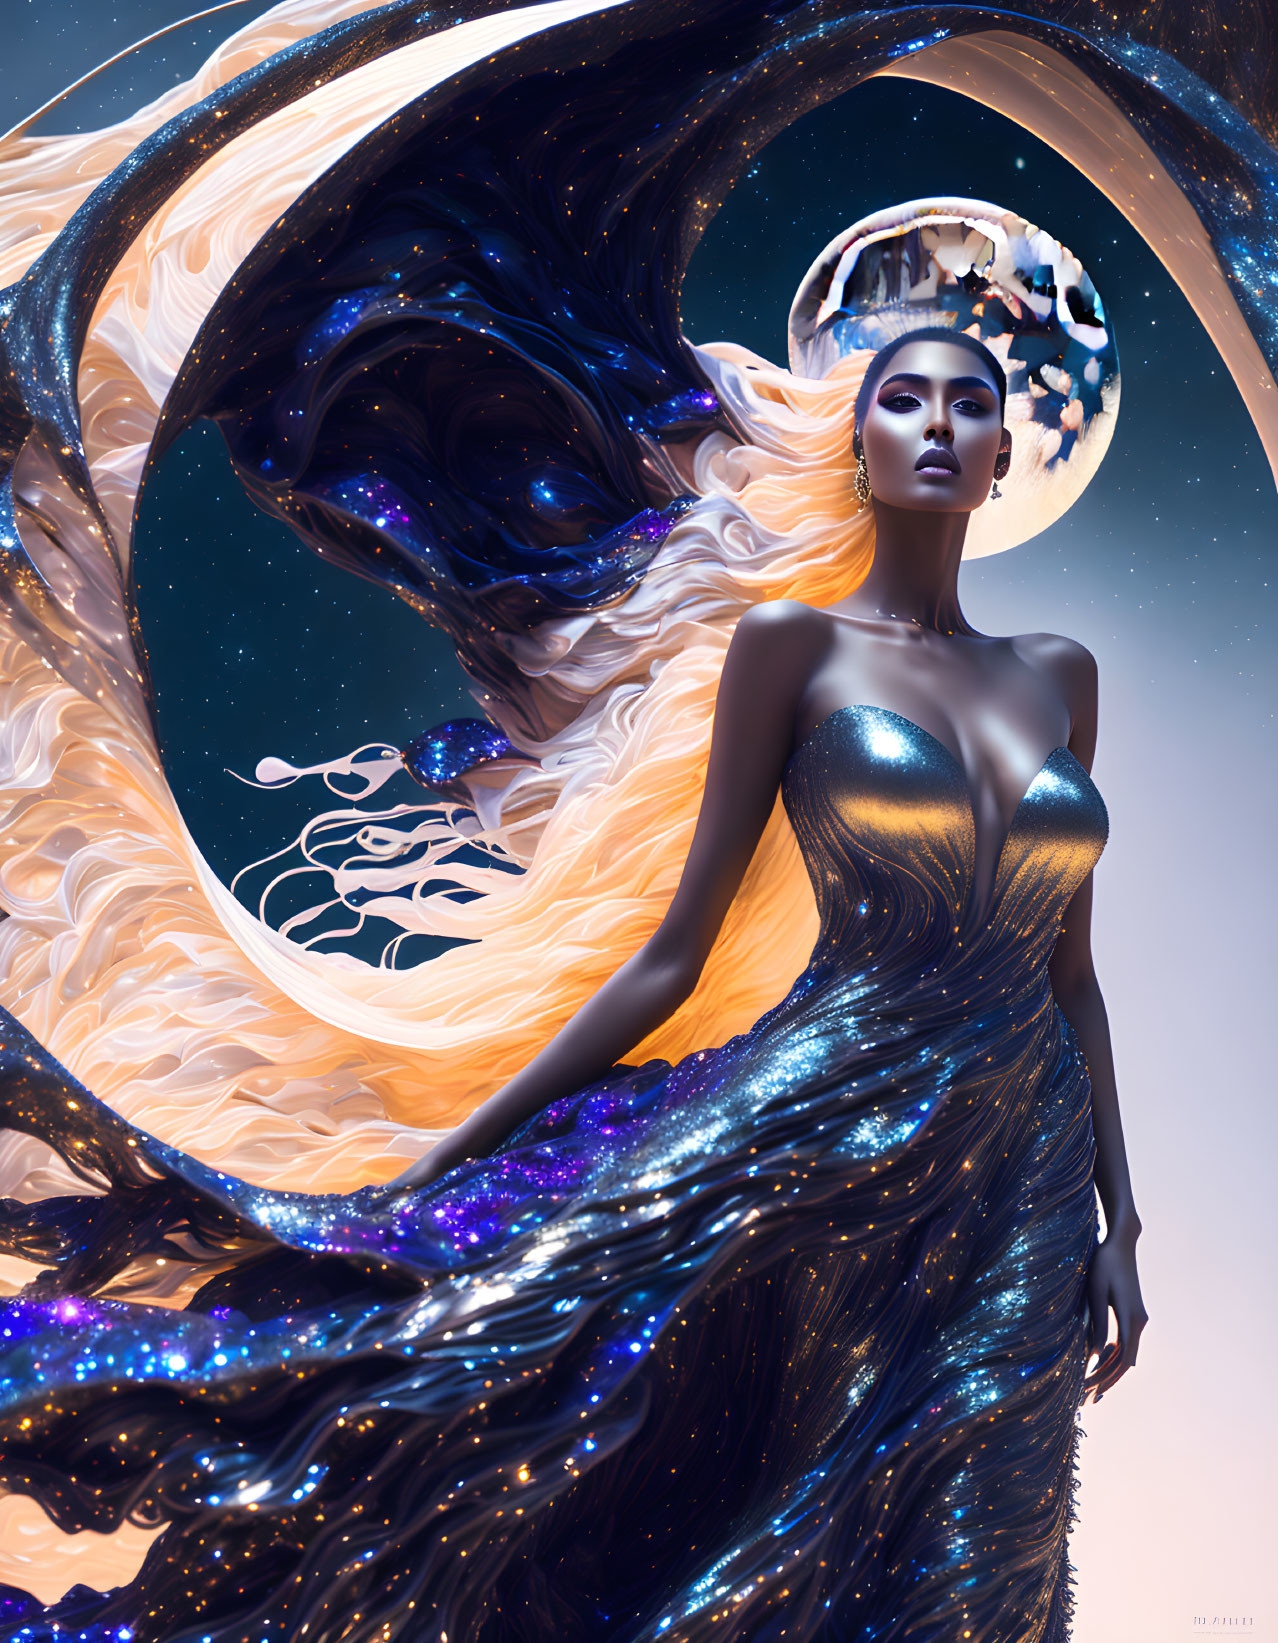 Woman in Sparkling Blue Dress Against Surreal Cosmic Background